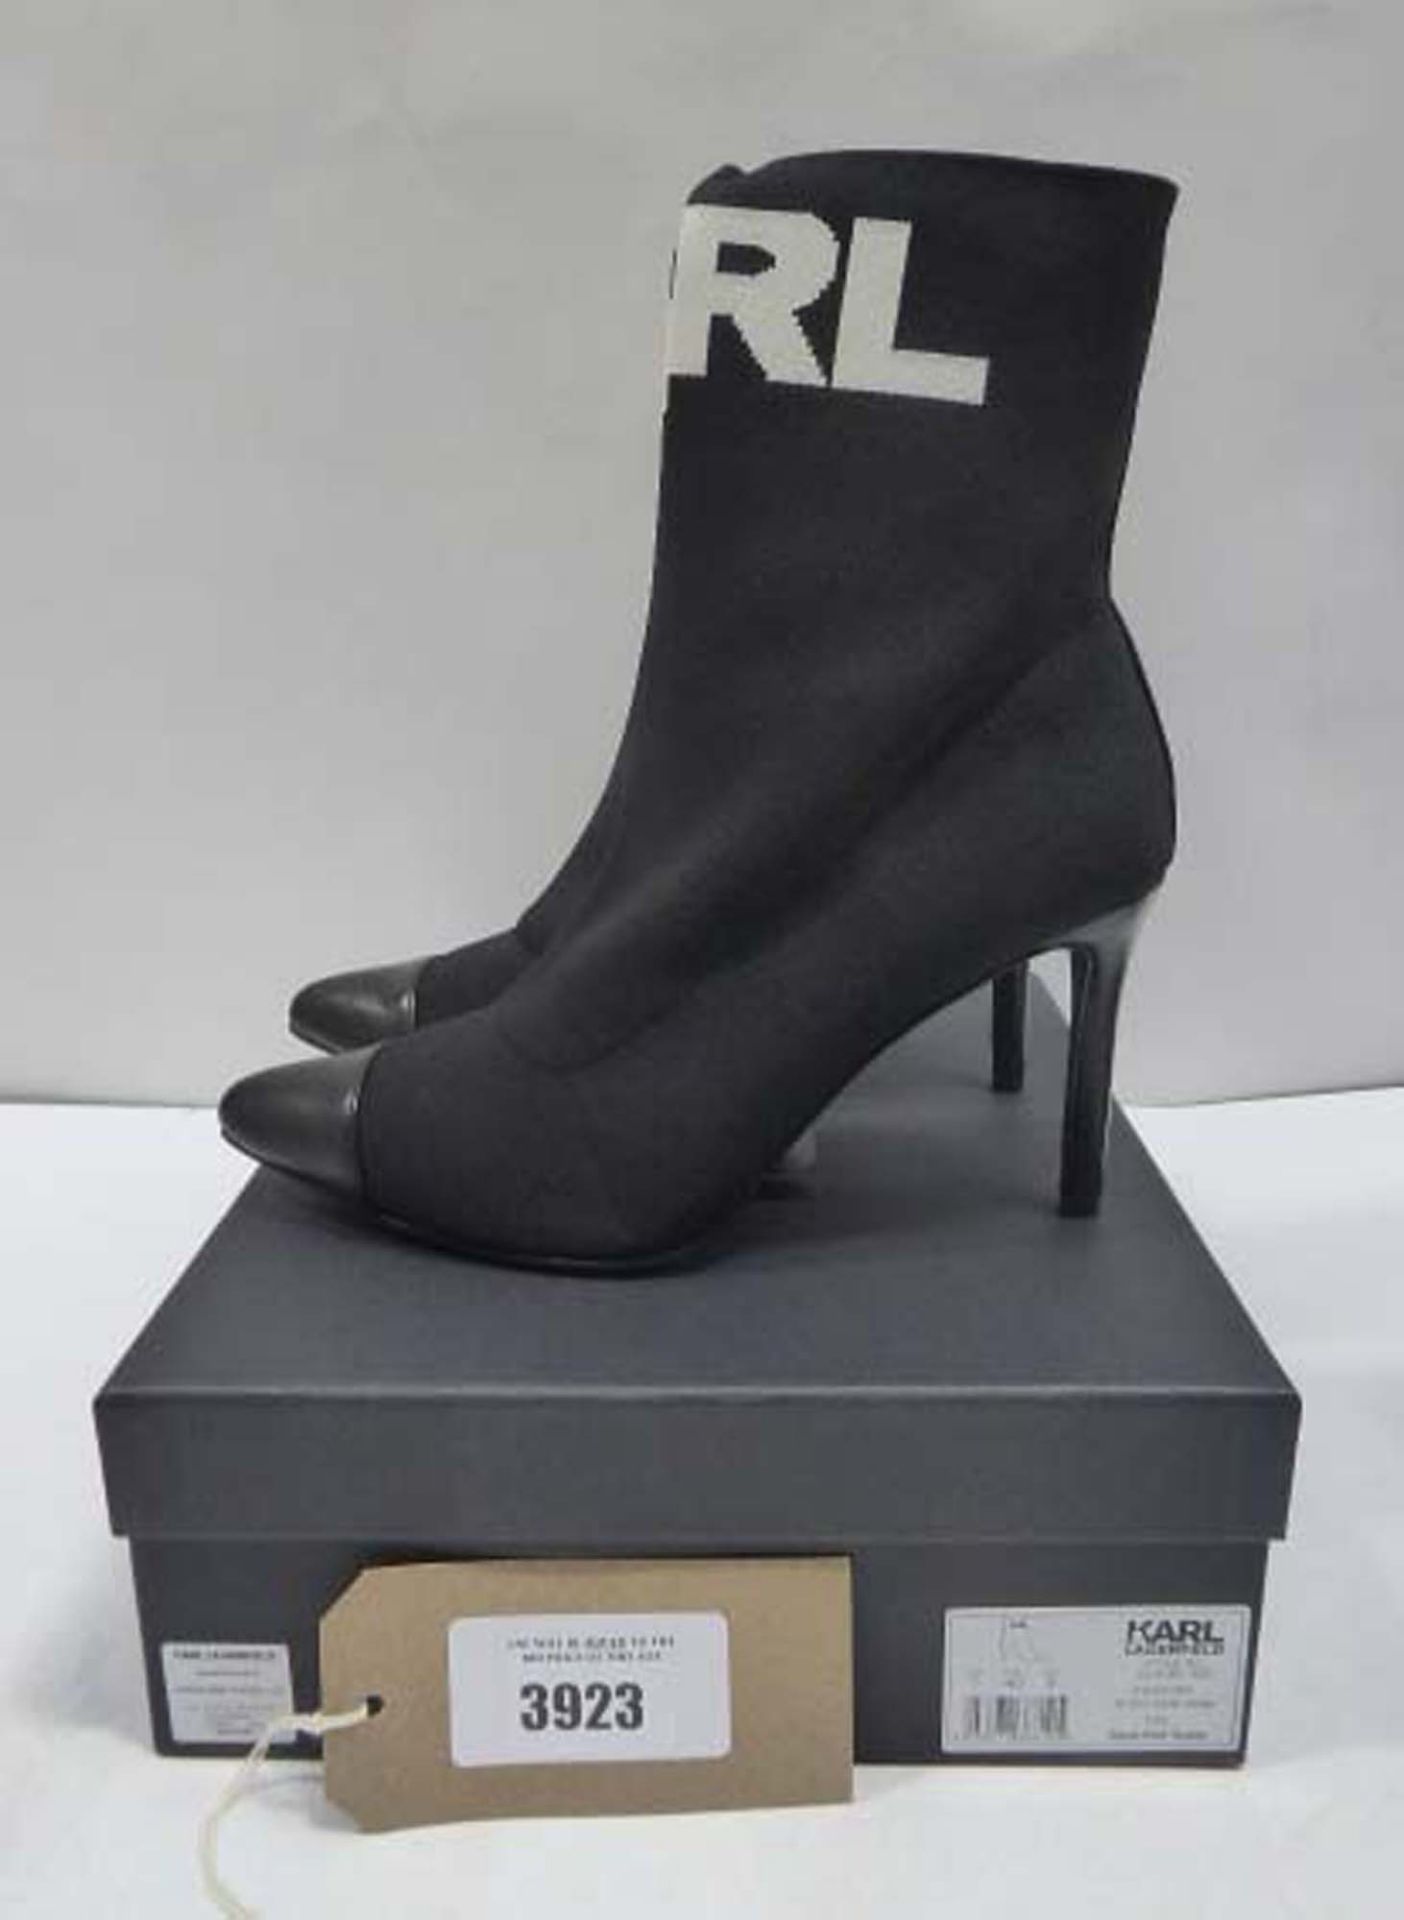 Karl Lagerfeld Pandora knitted ankle boots size 7